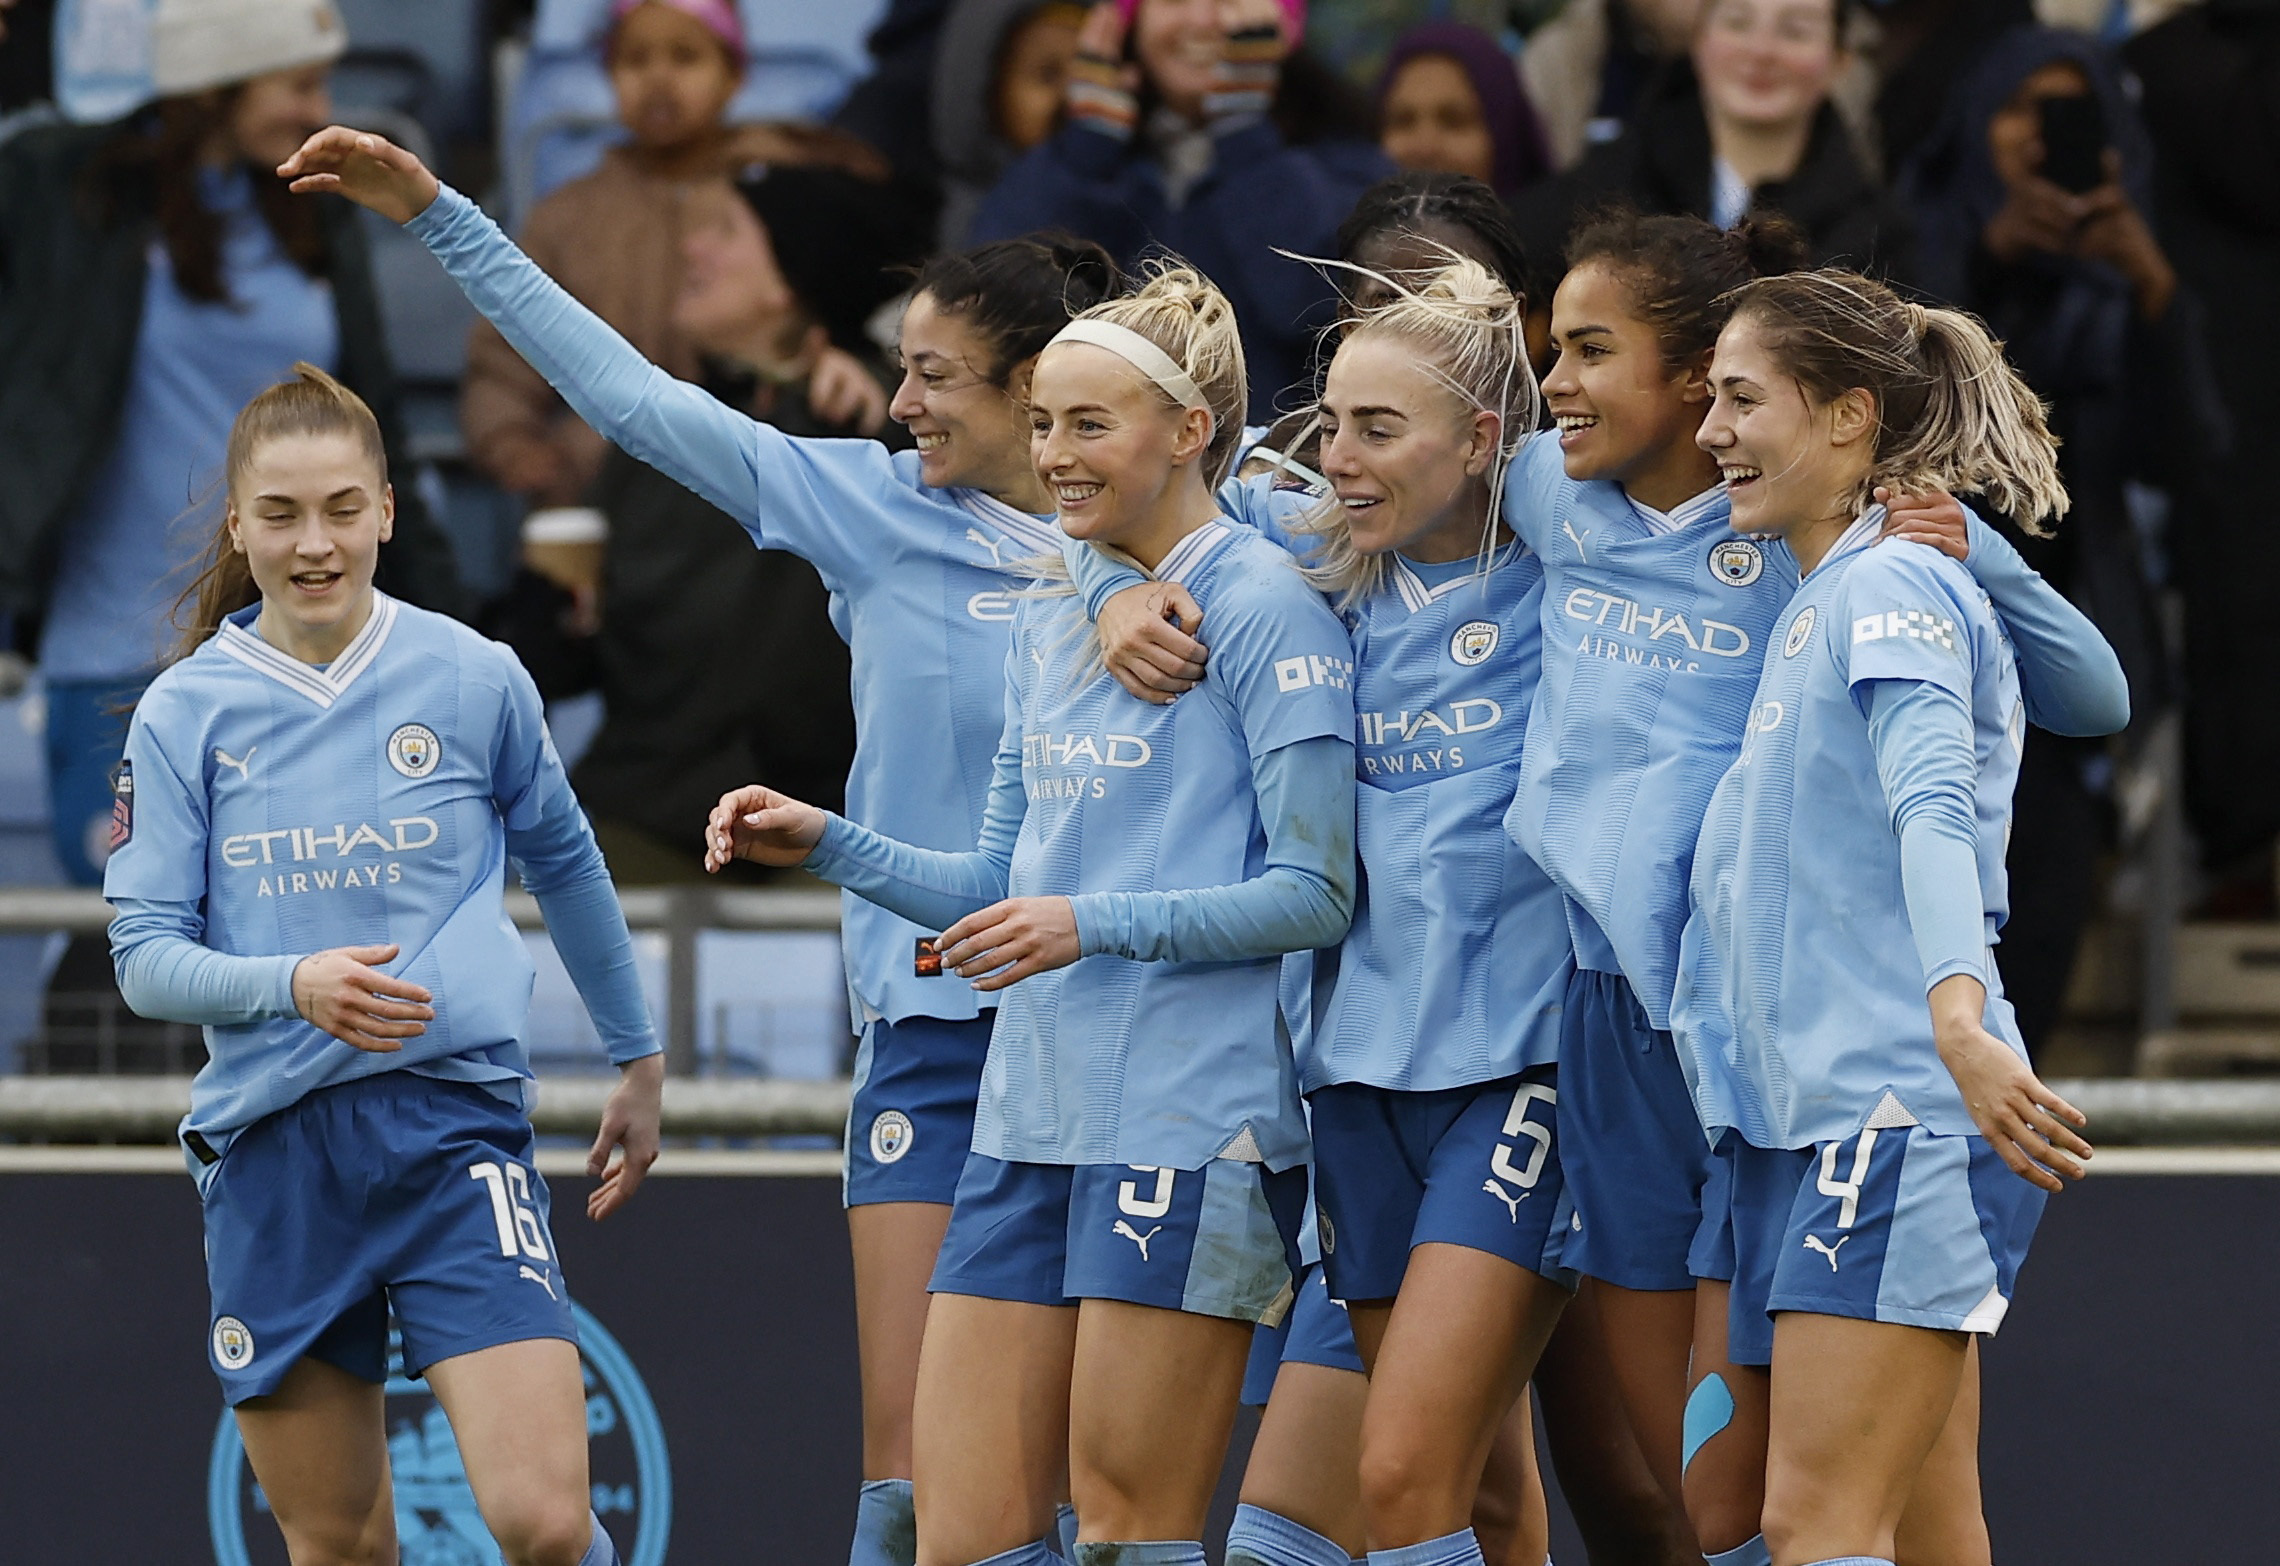 Women's sport draws record viewership in 2023 - UK research